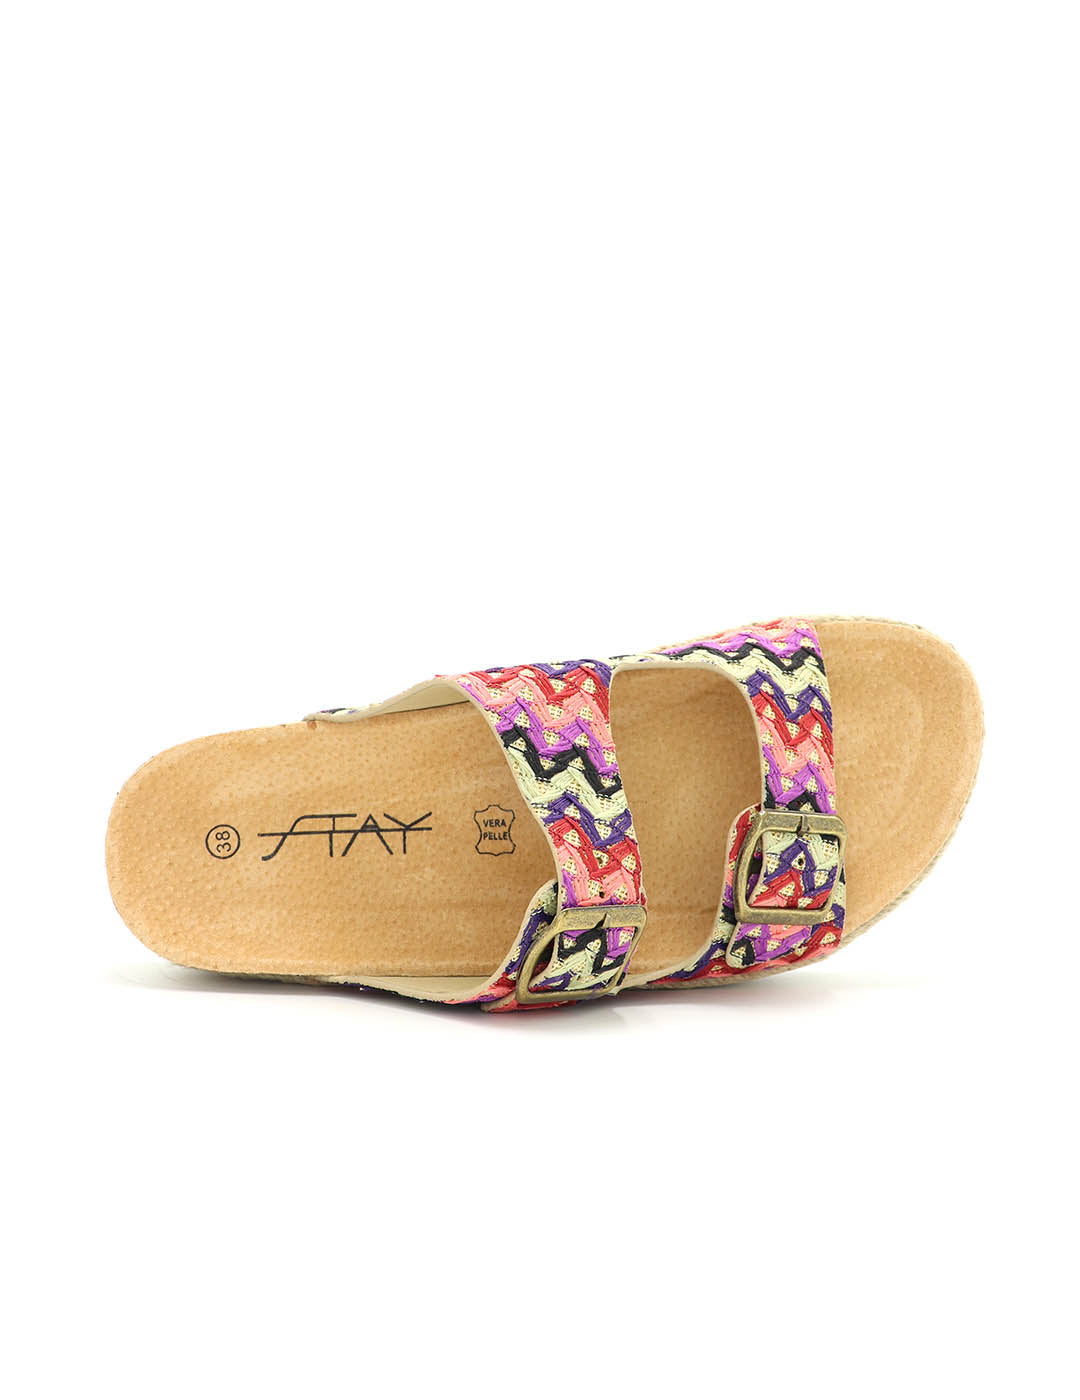 Zueco Pala STAY Mujer Multicolor Beig